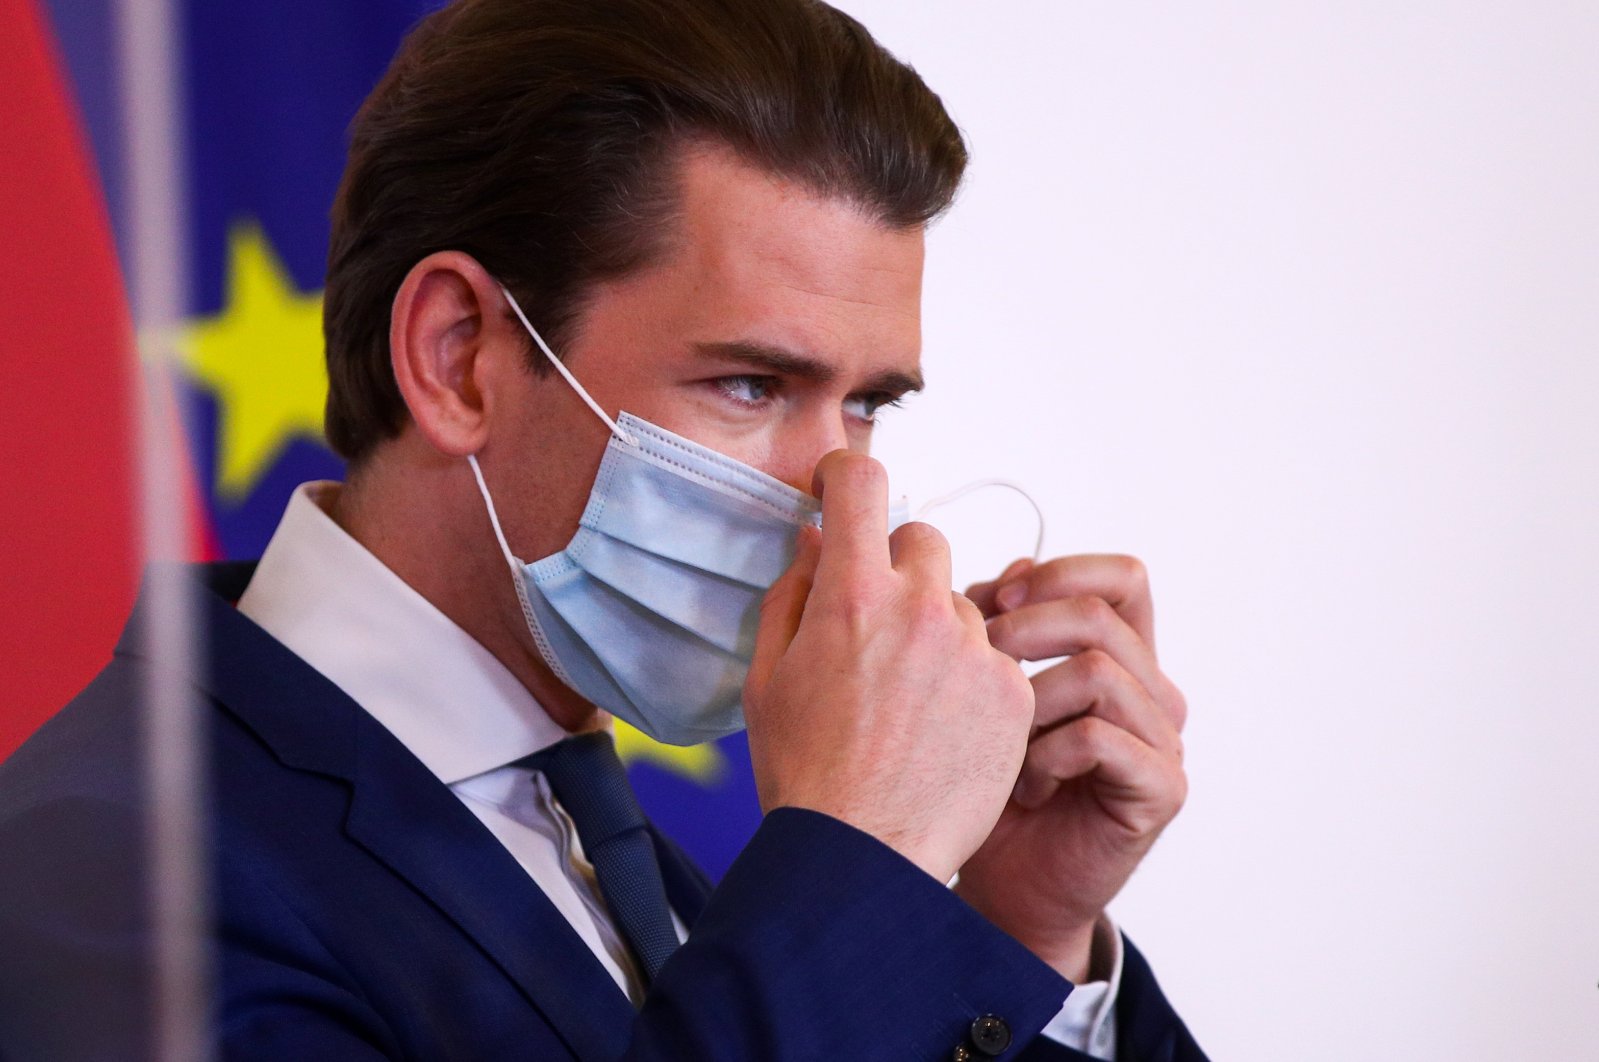 Austrian Chancellor Sebastian Kurz removes his face mask as he attends a news conference during the coronavirus outbreak in Vienna, Austria, May 29, 2020. (Reuters Photo)